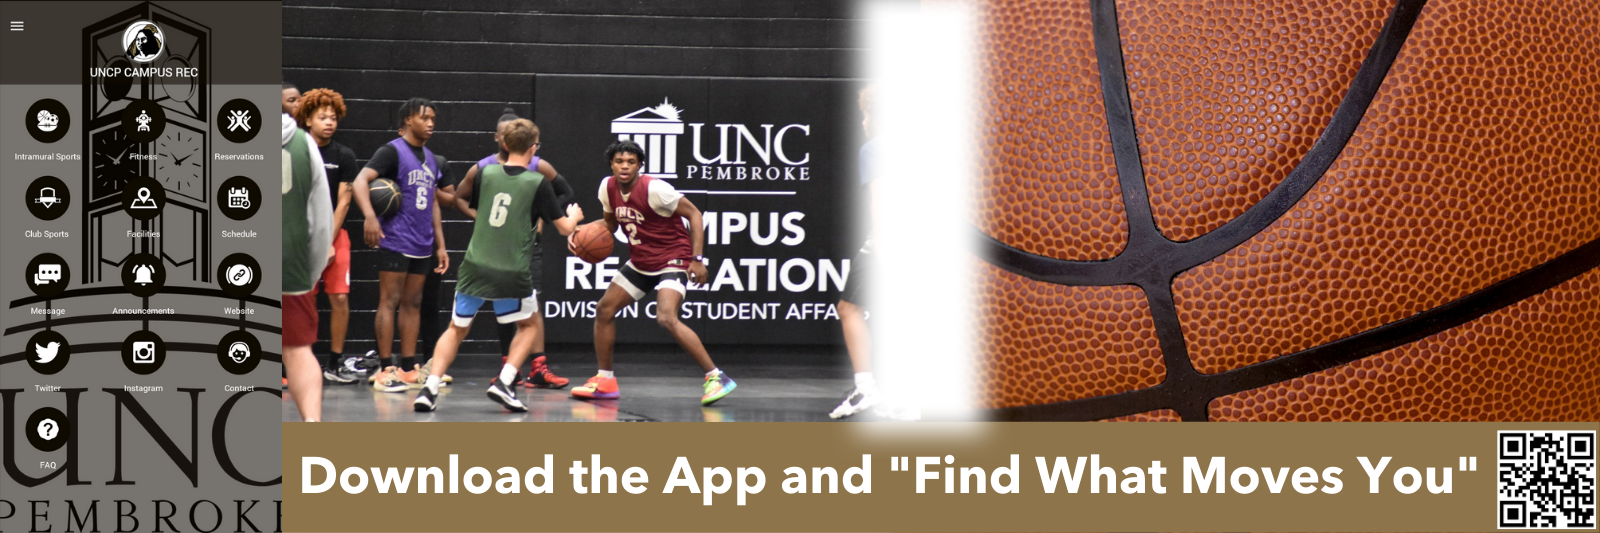 Students Playing Basketball with Campus Recreation App